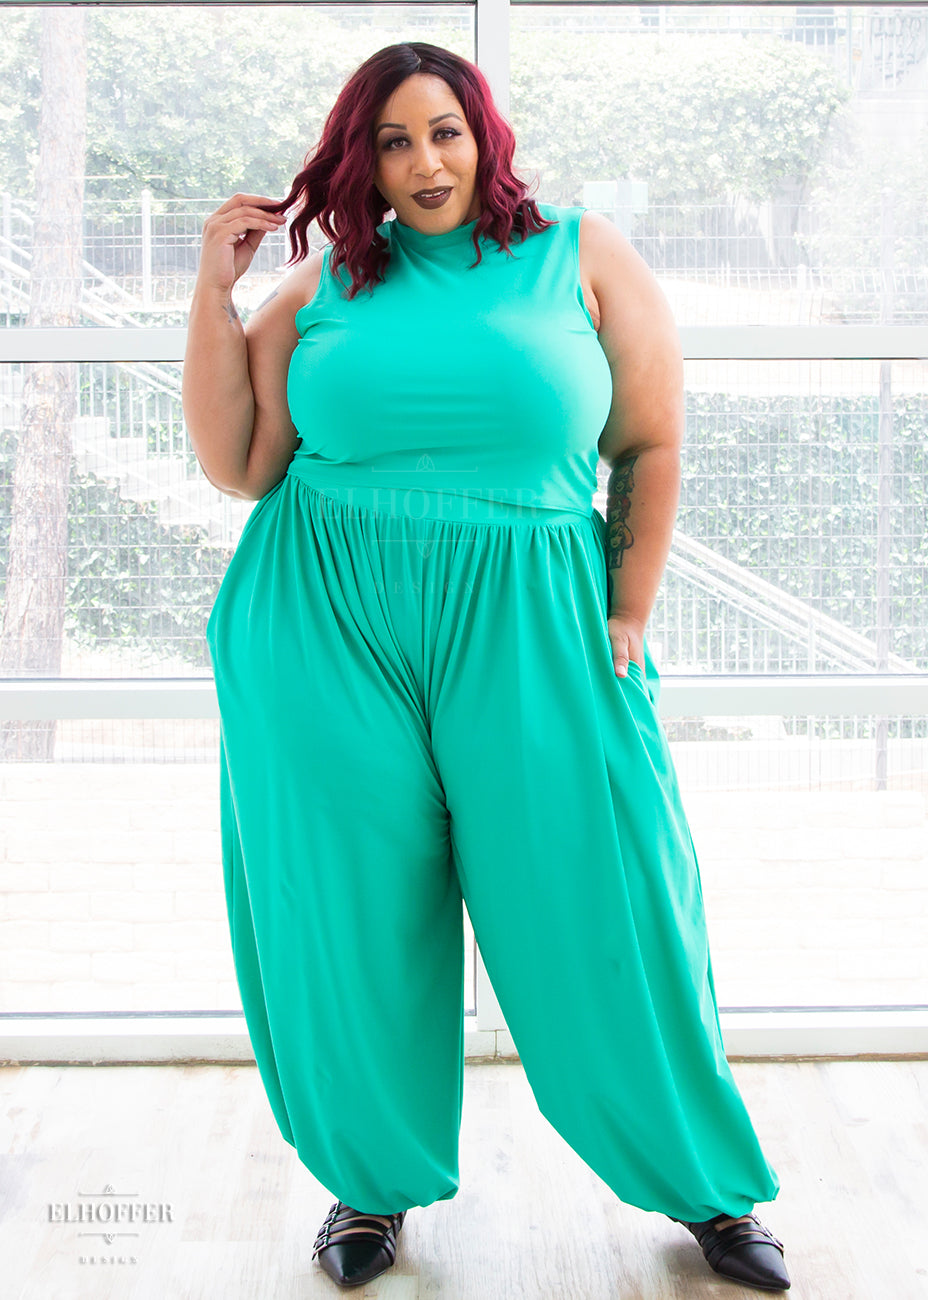 Dawn models the mock turtle neck sleeveless mint green crop top with matching harem style long pants with a fitted waistband and cuffs and flowy fabric.